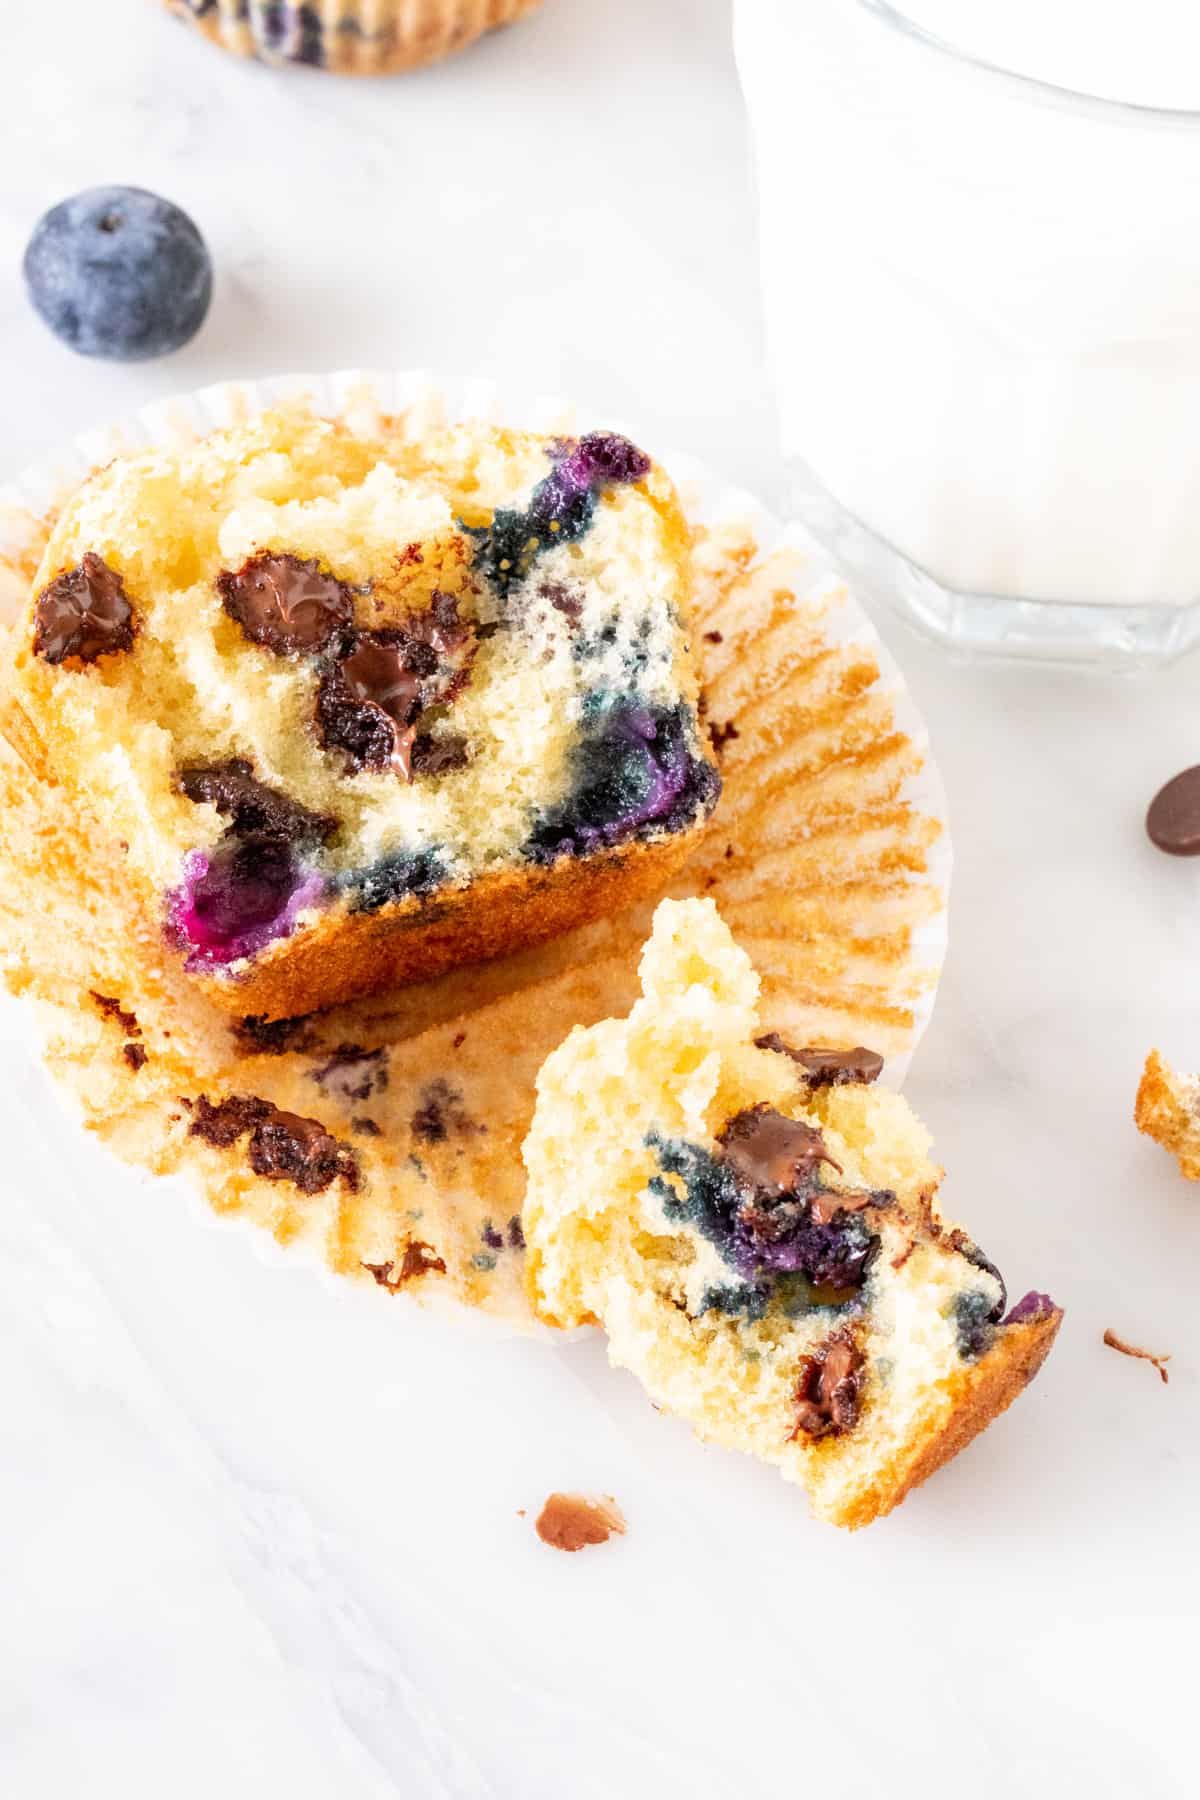 Broken muffin filled with blueberries and chocolate chips